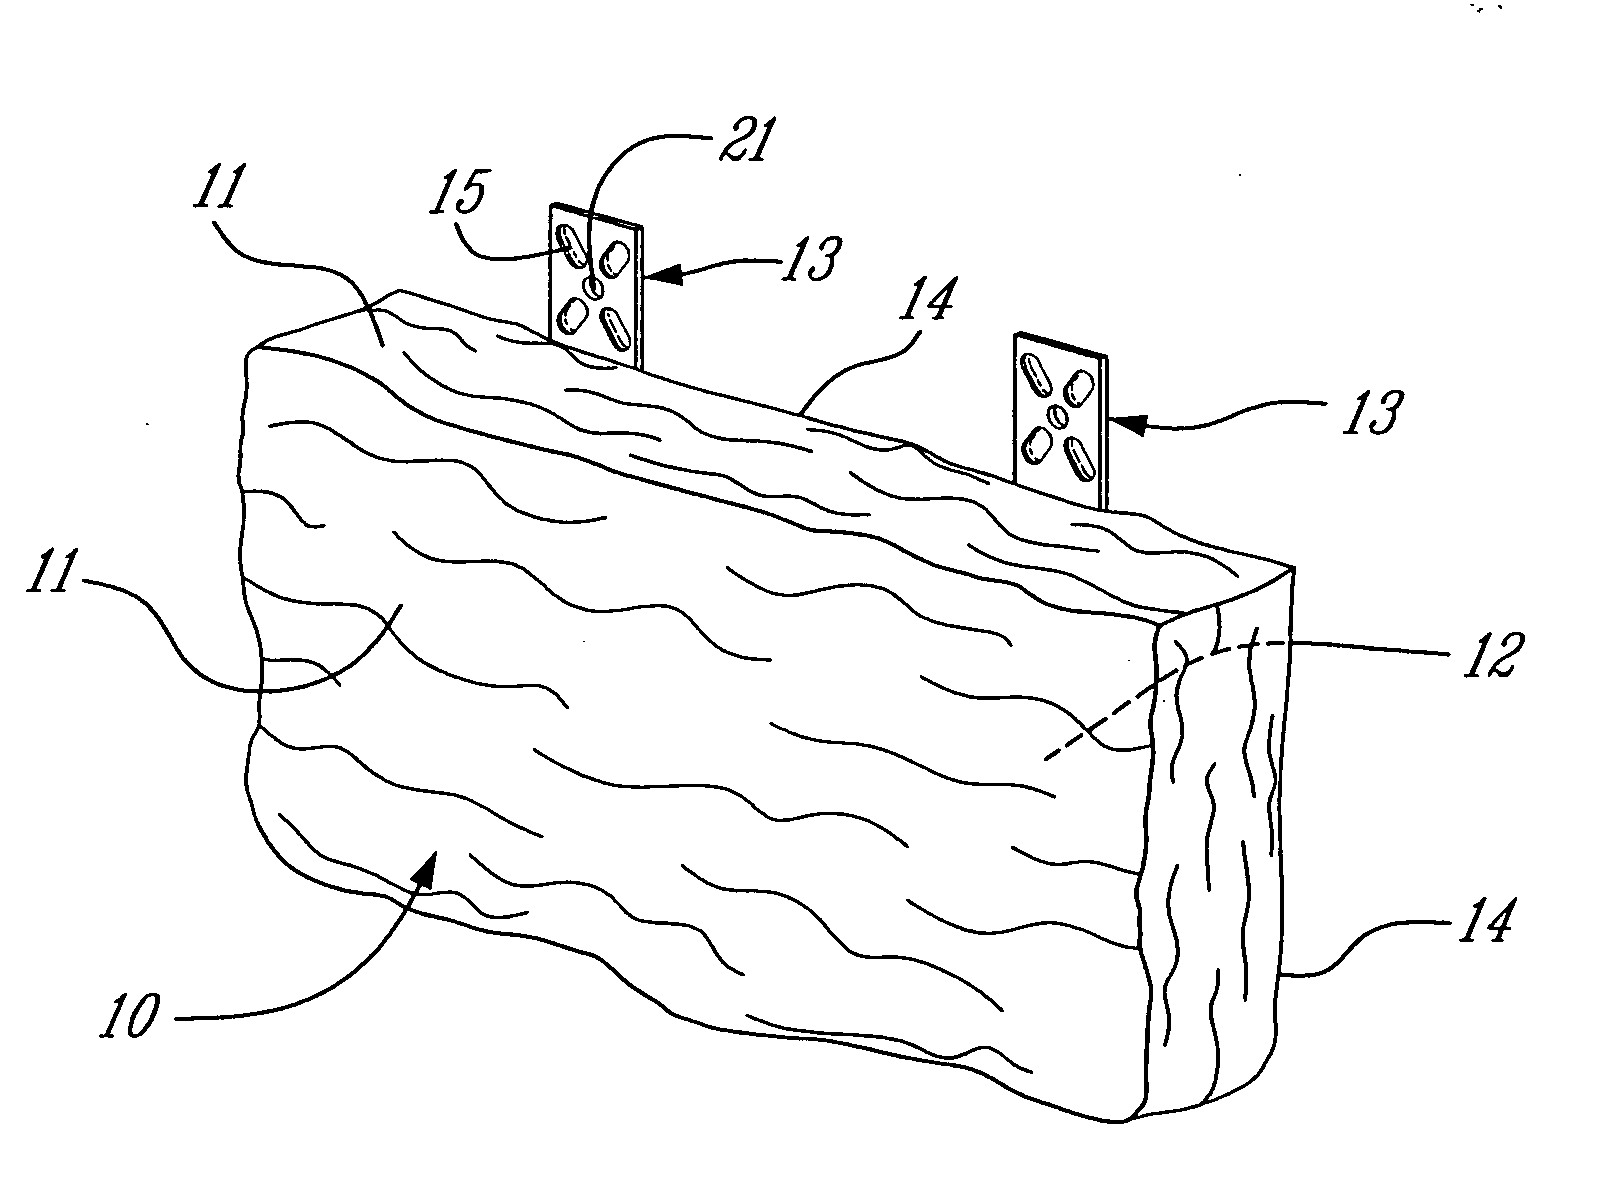 Artificial stone anchoring system and method